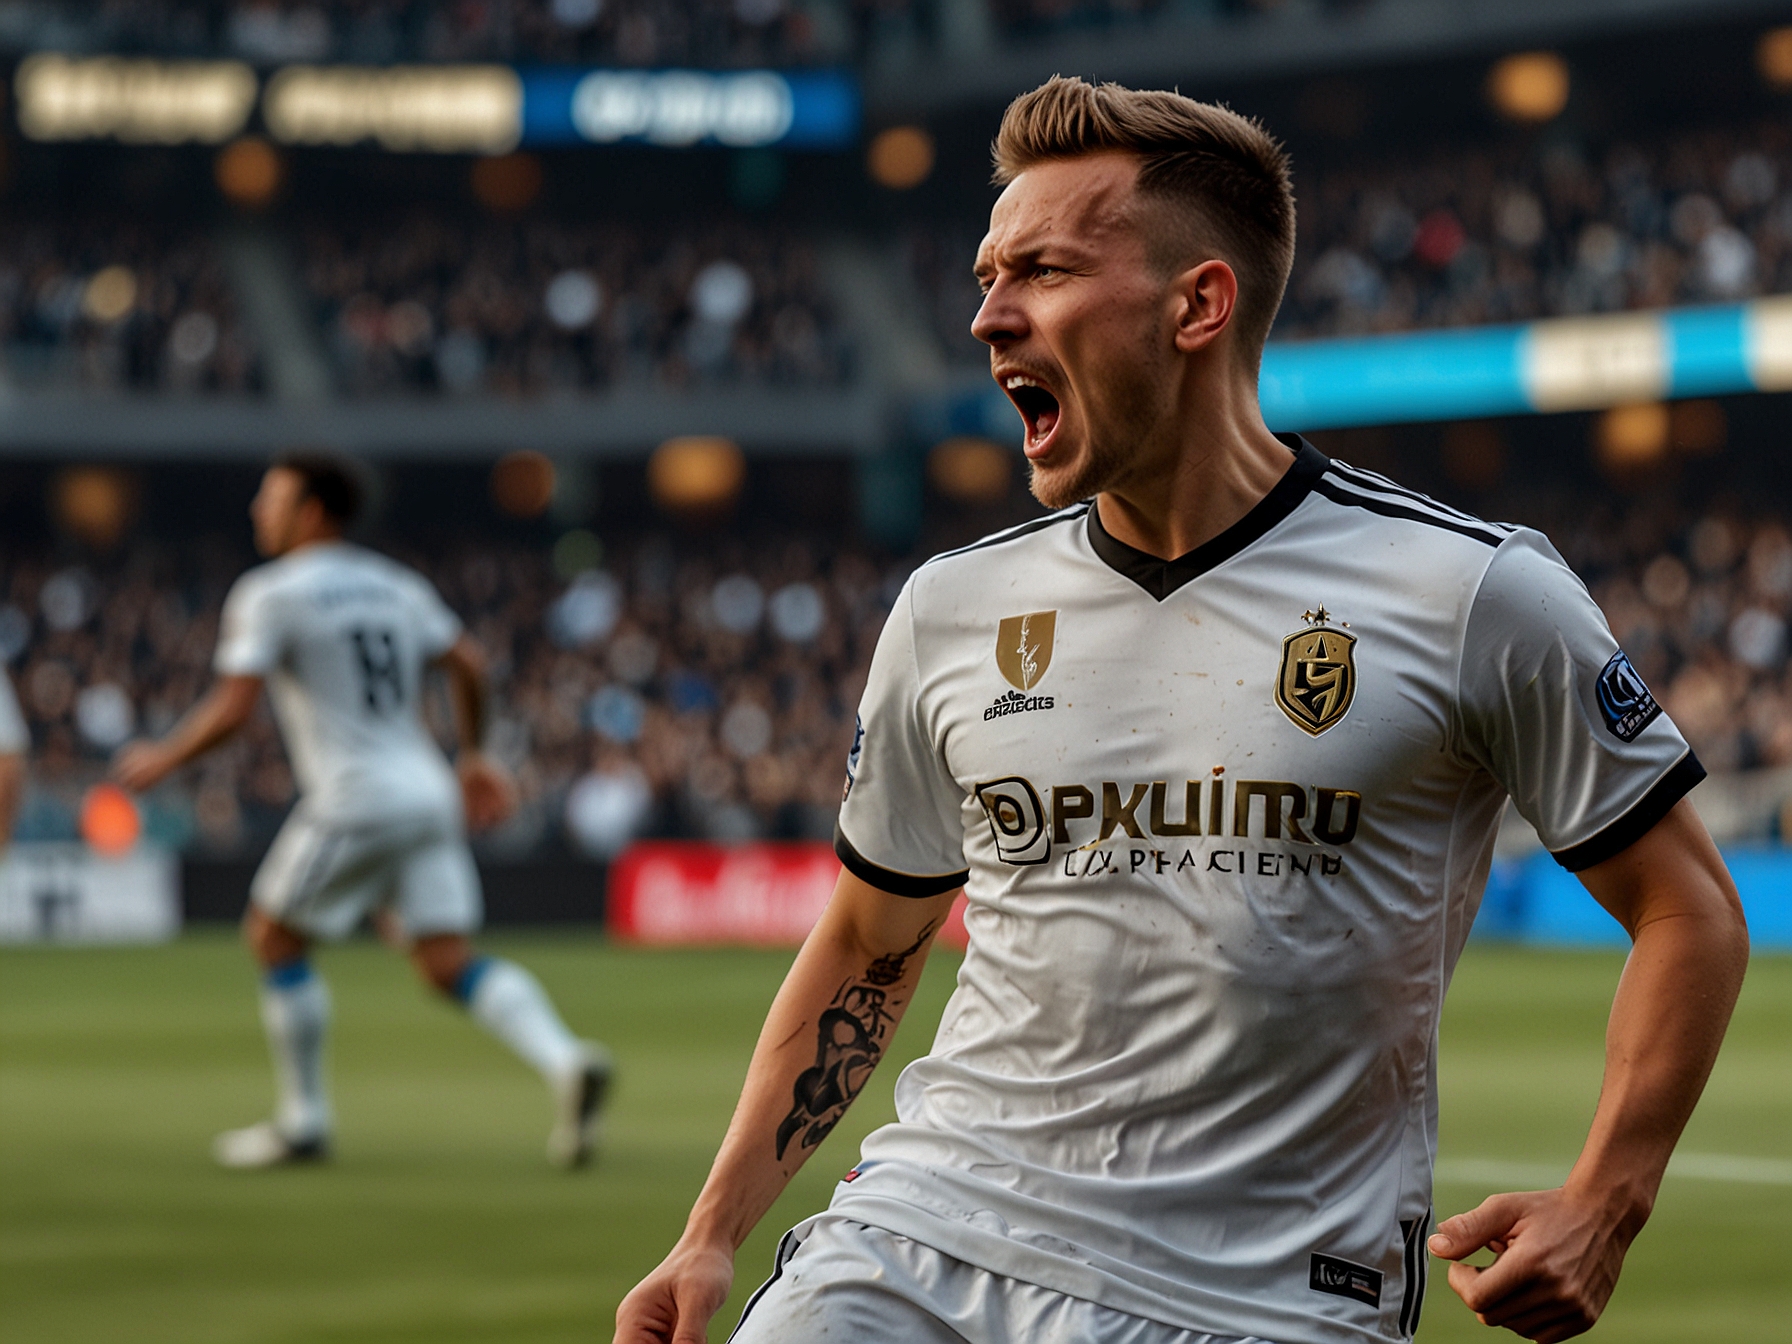 Mateusz Bogusz taking a powerful shot on goal during the LAFC's match against the San Jose Earthquakes. The image highlights his critical role with two goals and an assist in the game.